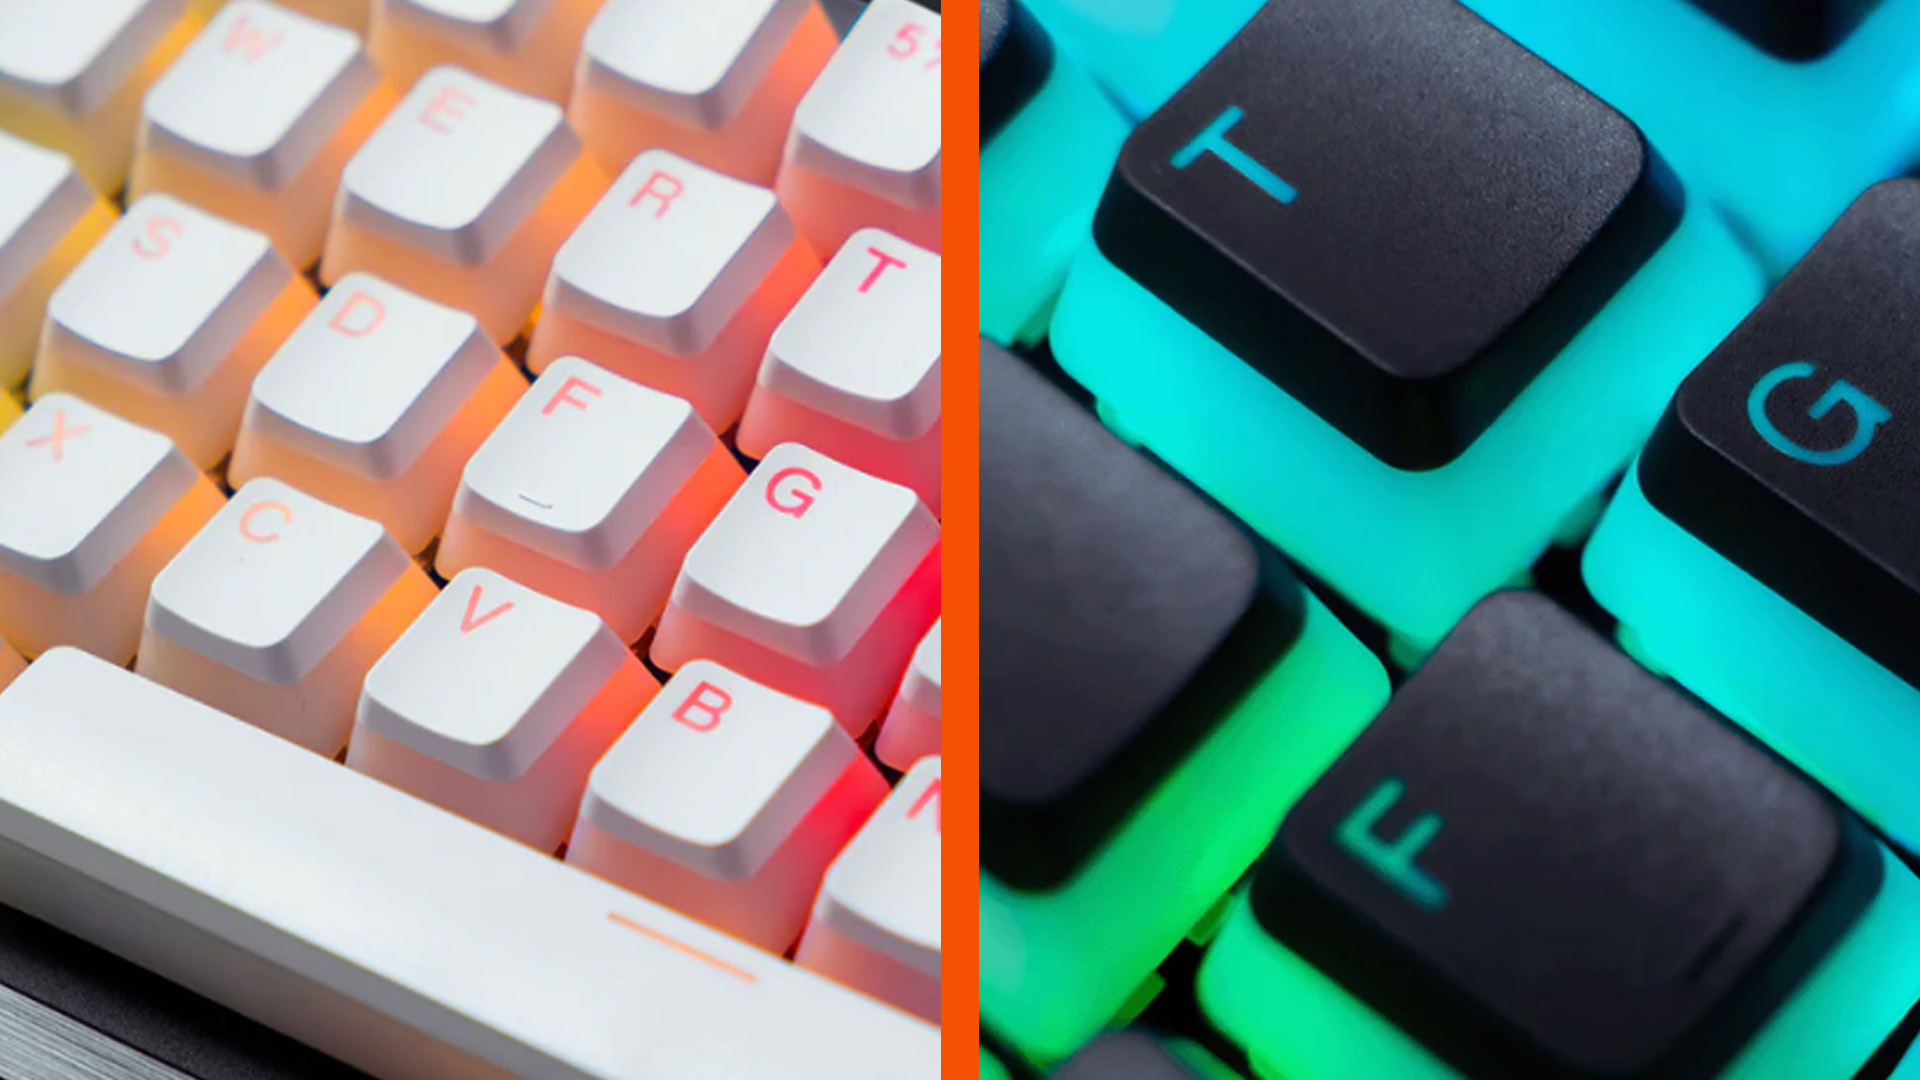 Scale new RGB heights with these Mountain Snow keycaps